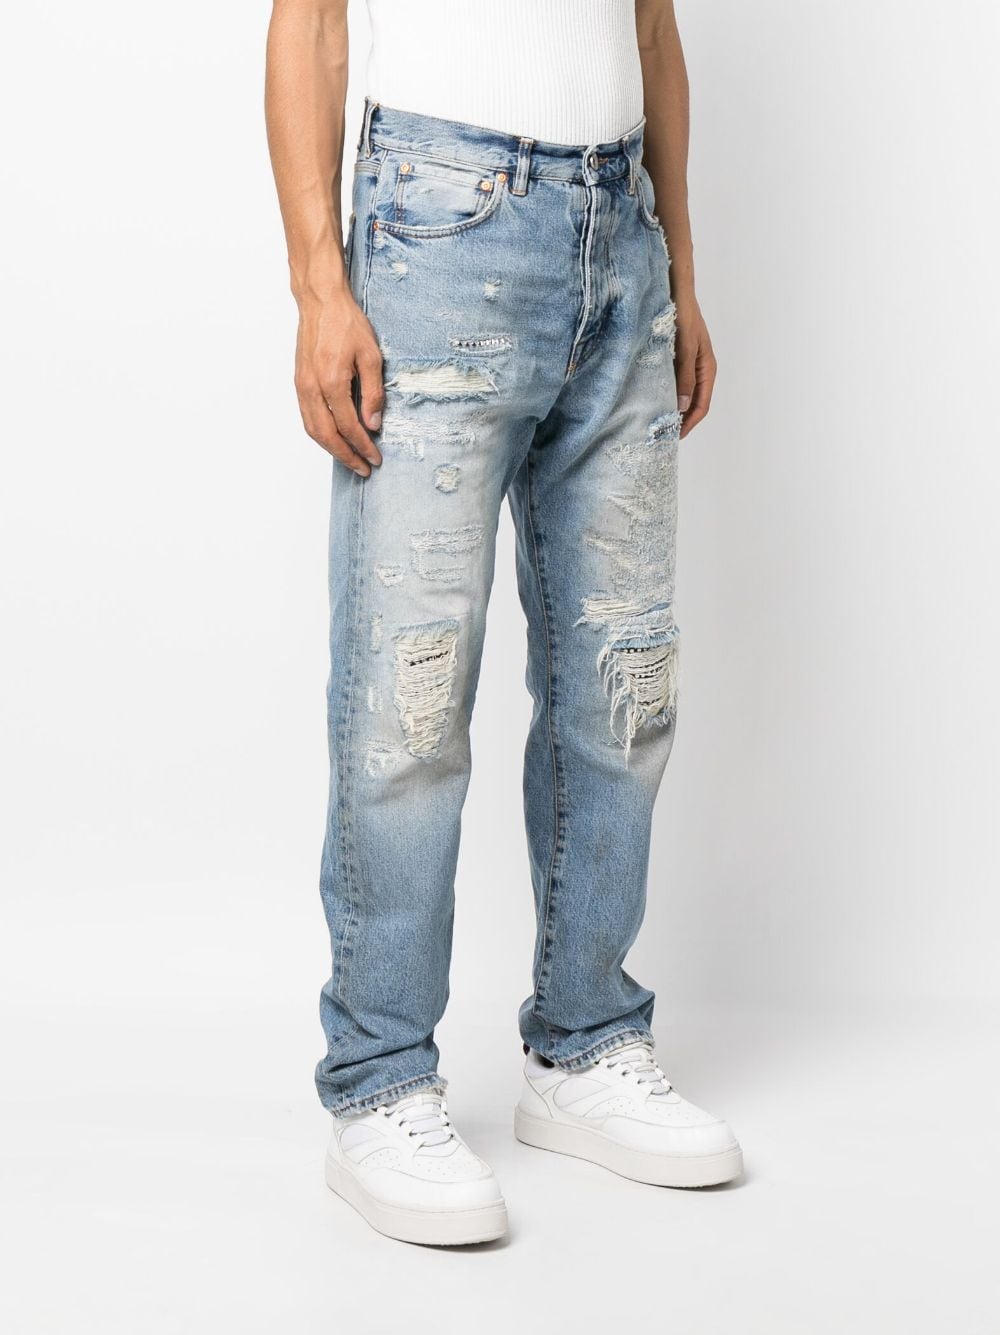 Mens Designer Purple Ripped Straight Denim Jeans Pant With Washed Old Long  Hole Sizes 30 11 From Fashionclothing123, $48.24